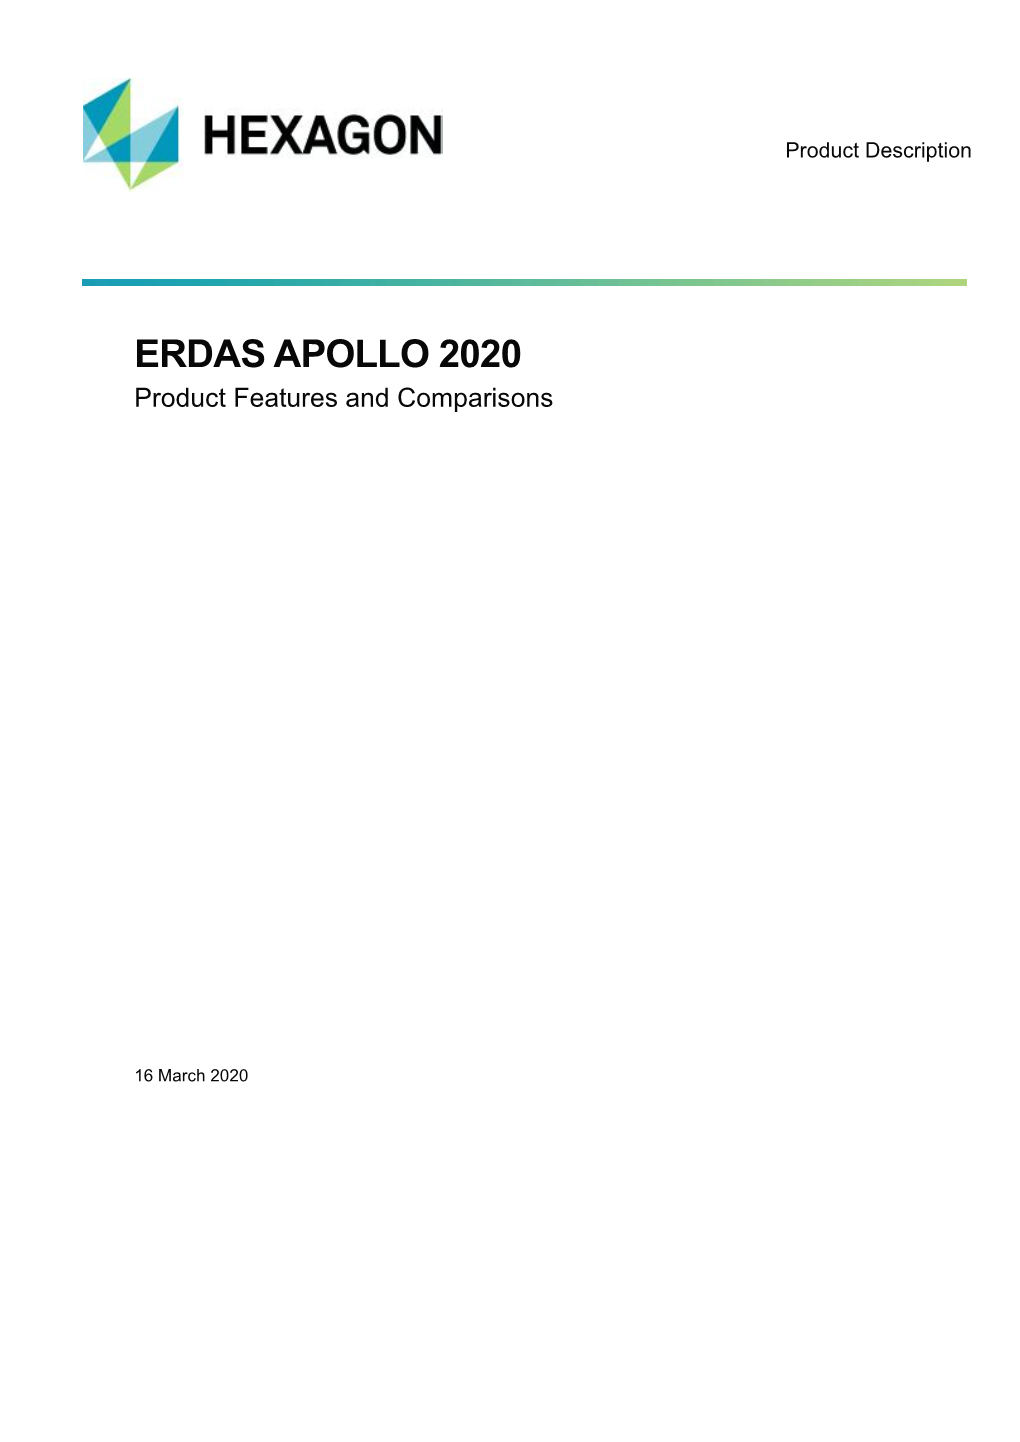 ERDAS APOLLO 2020 Product Features and Comparisons